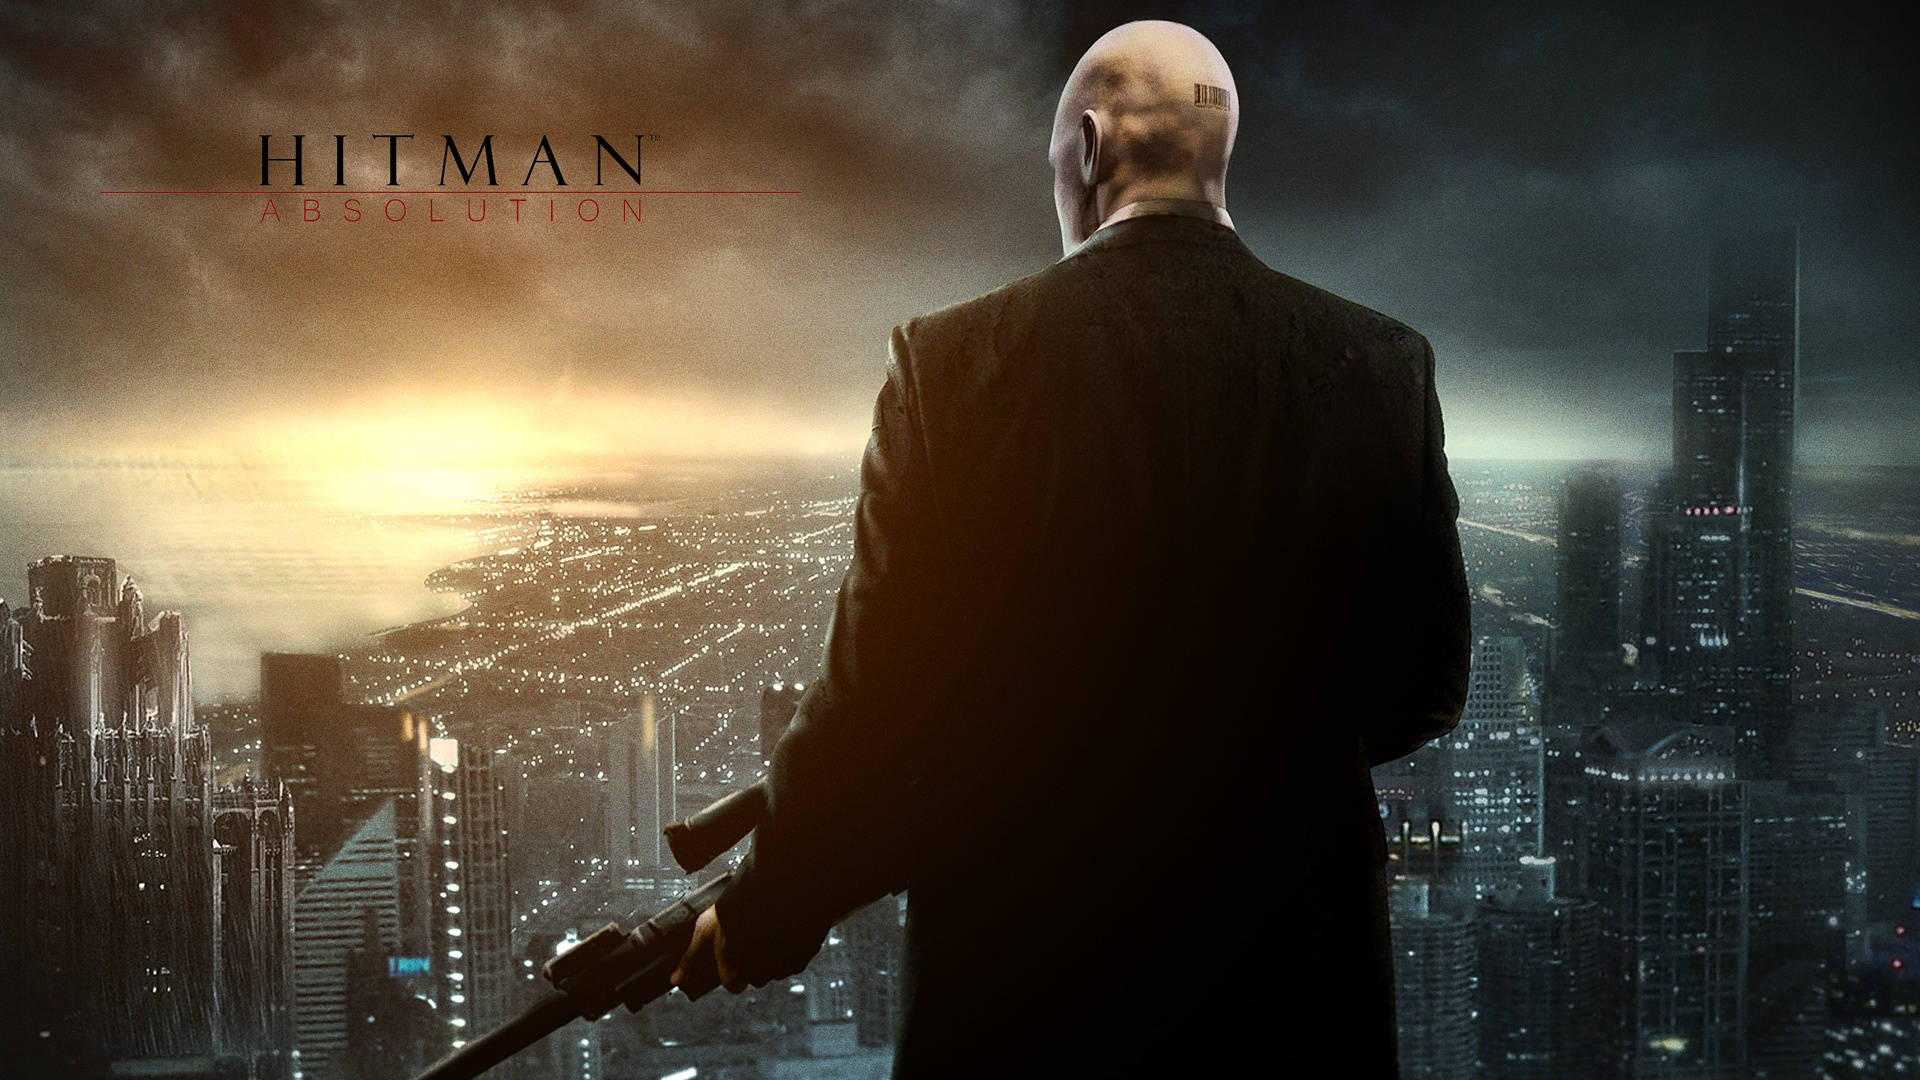 Hitman Hd Absolution Game Art Background